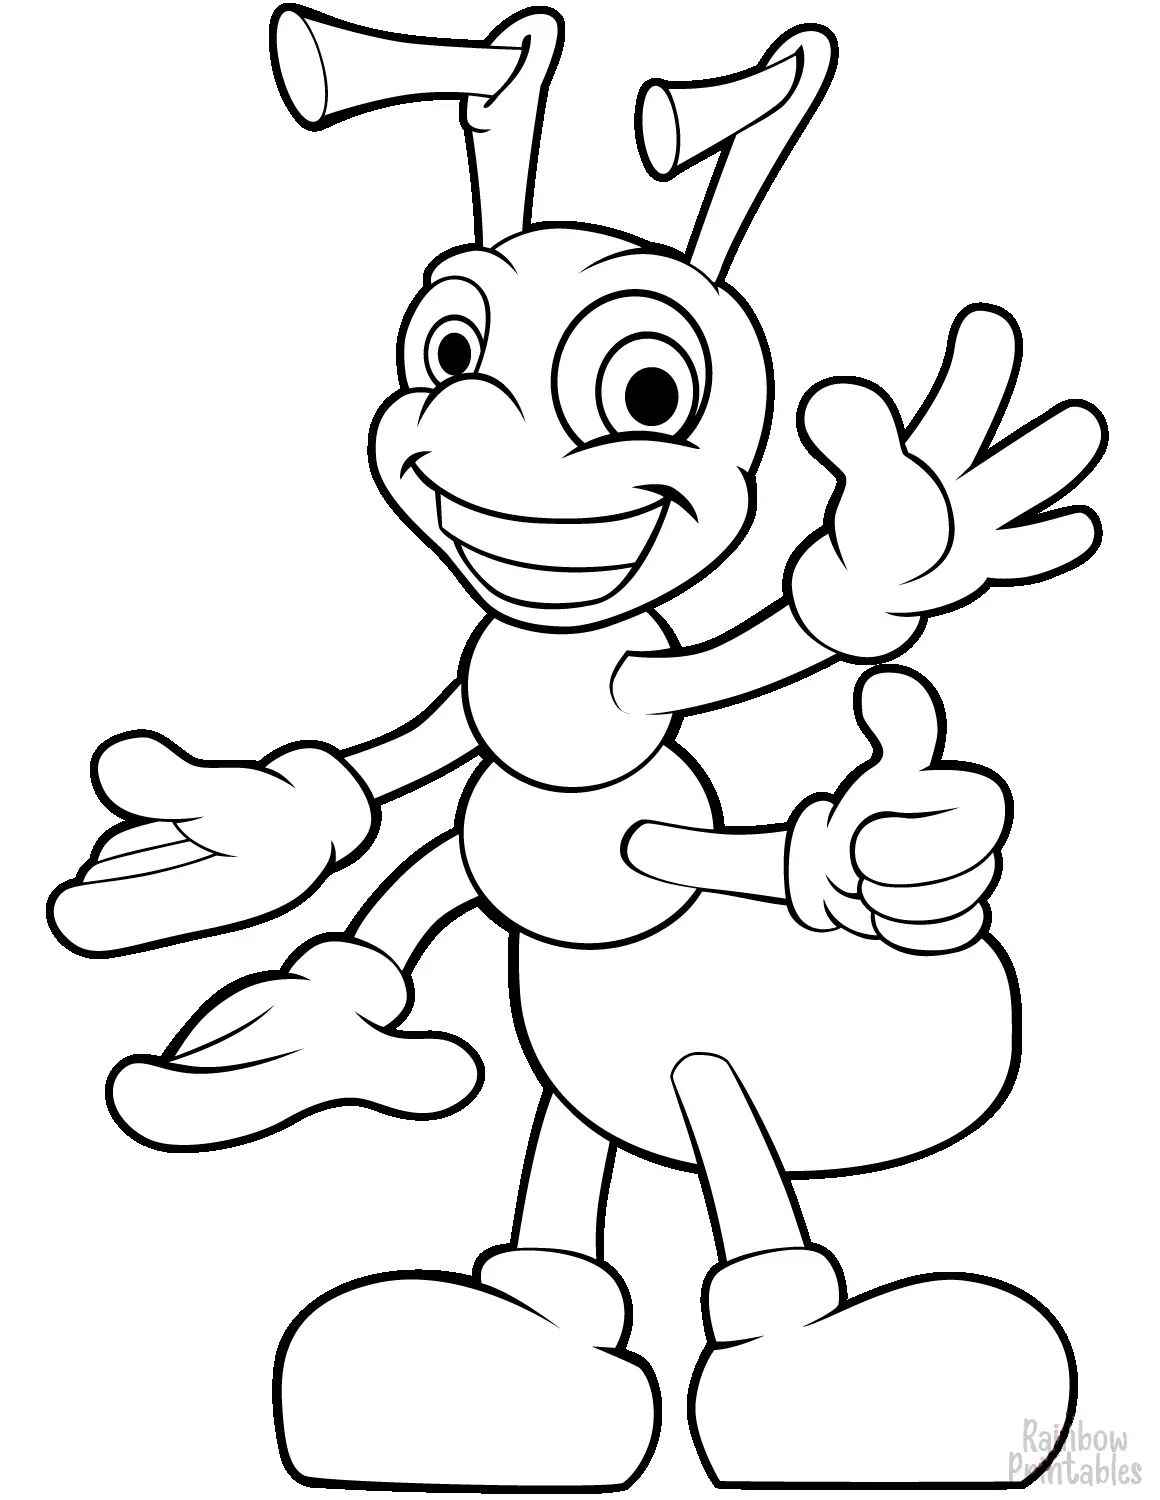 insect-doodle-cute-cartoon-ant-coloring-page-Simple Easy Color Animal Pages for Kids